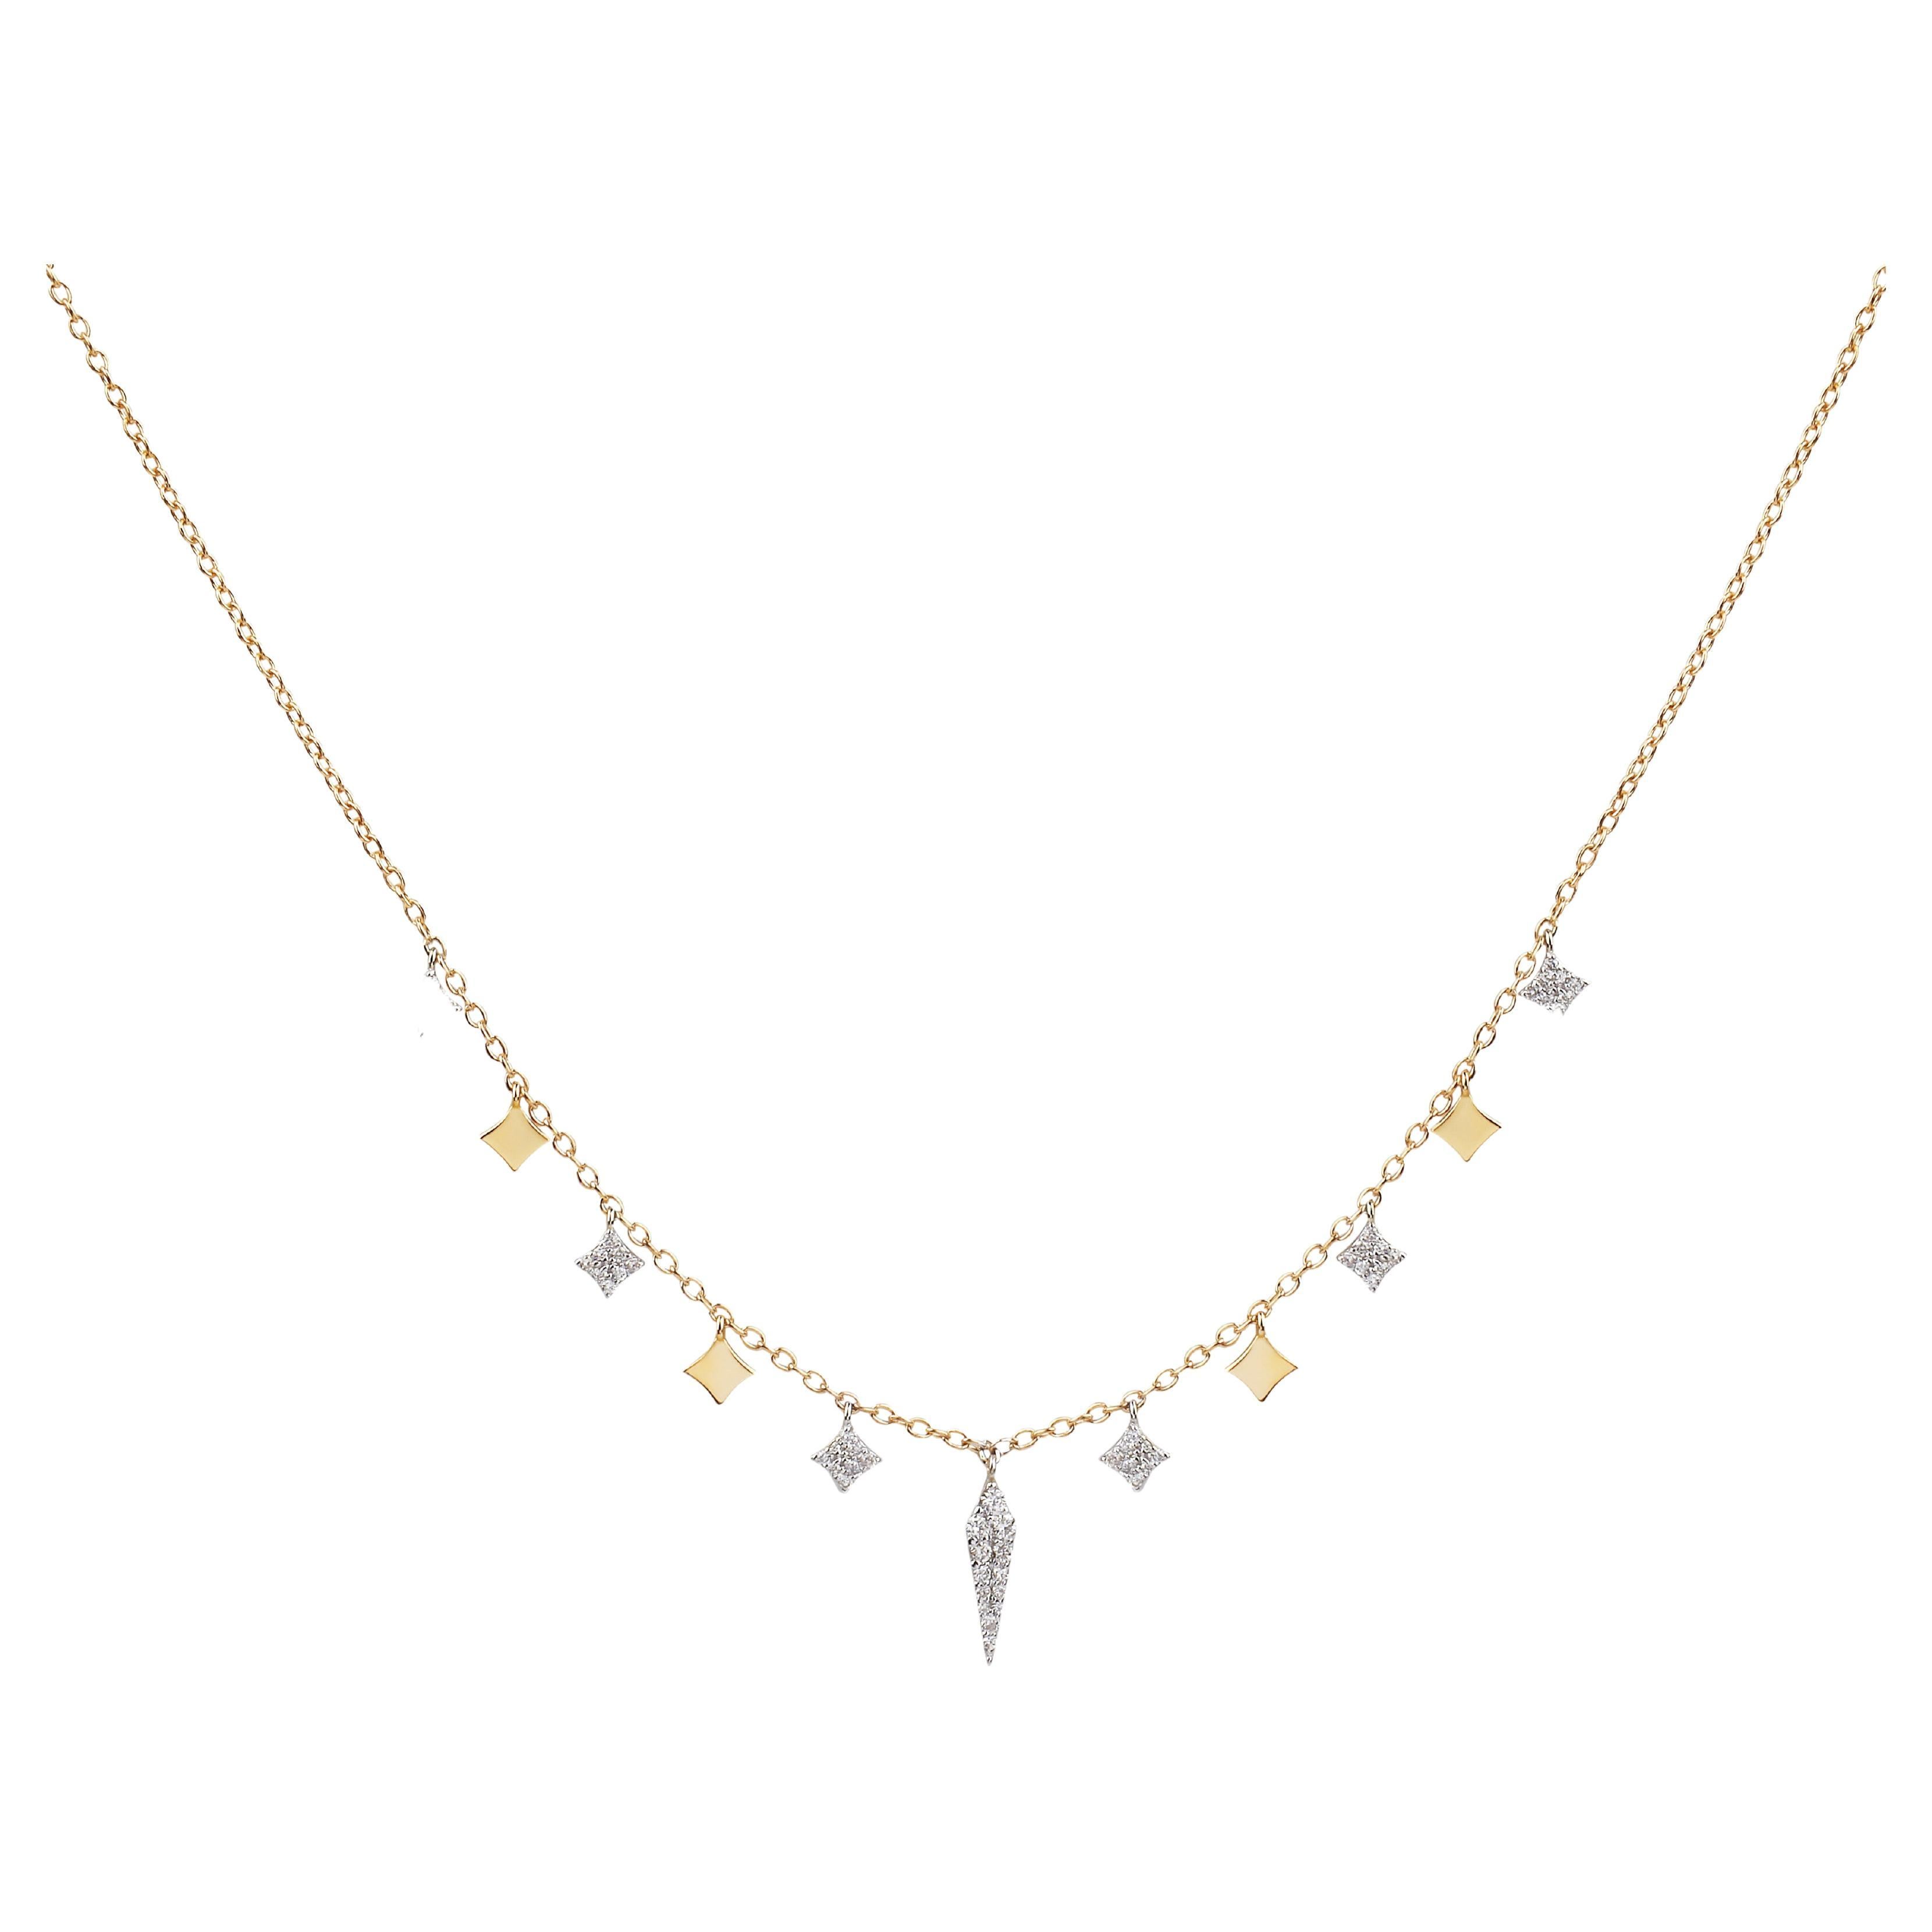 Charm Diamond Chain Necklace in 18K Yellow Gold